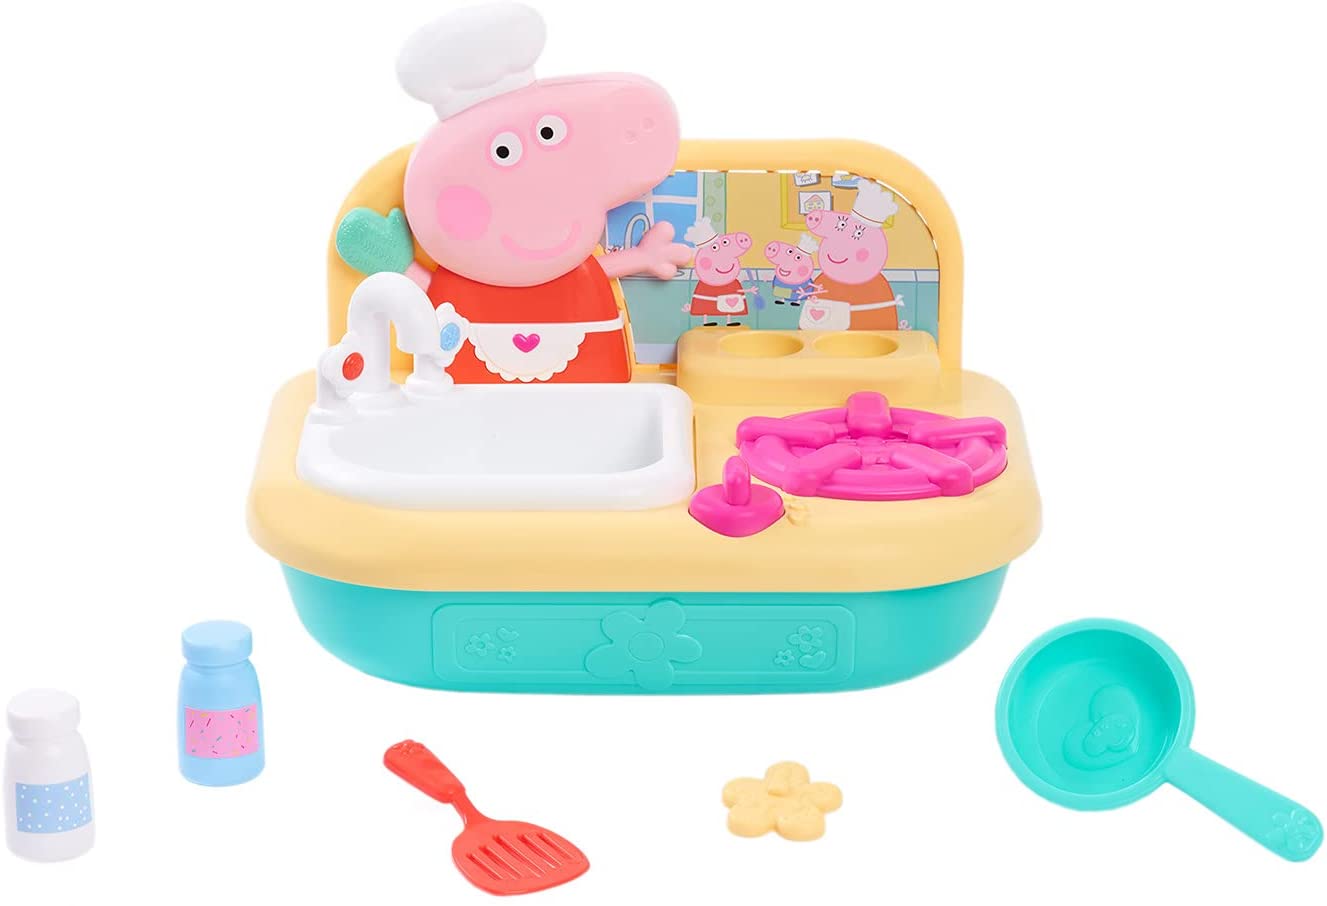 Peppa Pig Cooking Fun Tabletop Kitchen Role Play $10.45 + Free Ship w/Prime